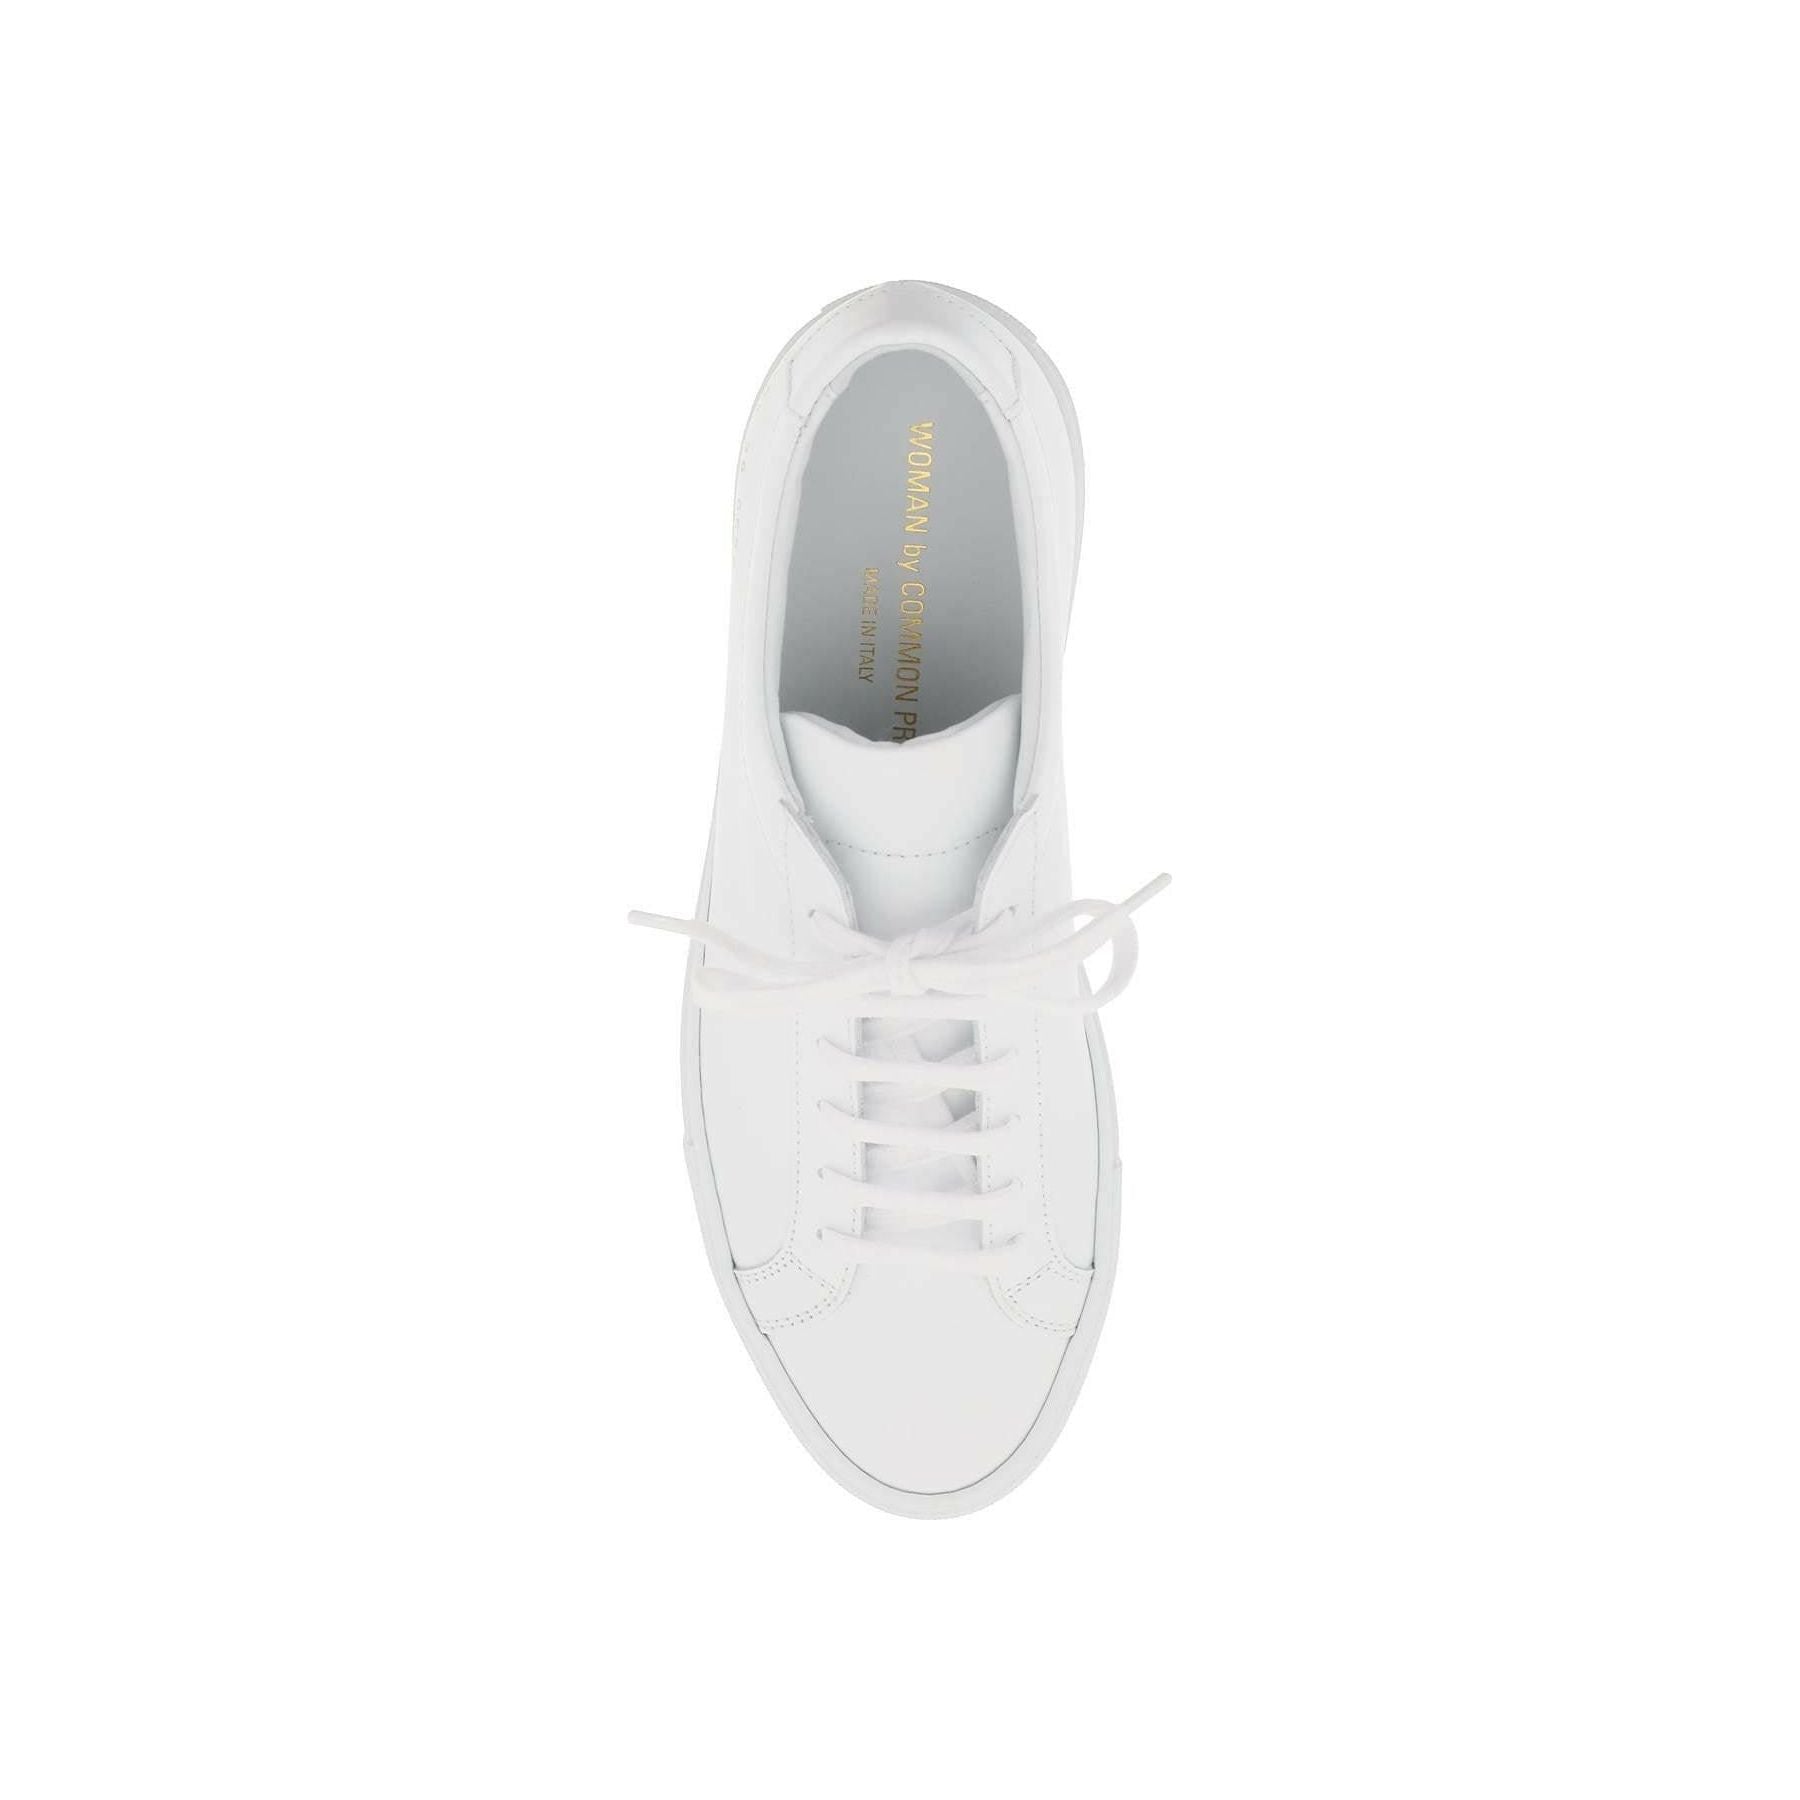 White Original Achilles Low-Top Leather Sneakers COMMON PROJECTS JOHN JULIA.